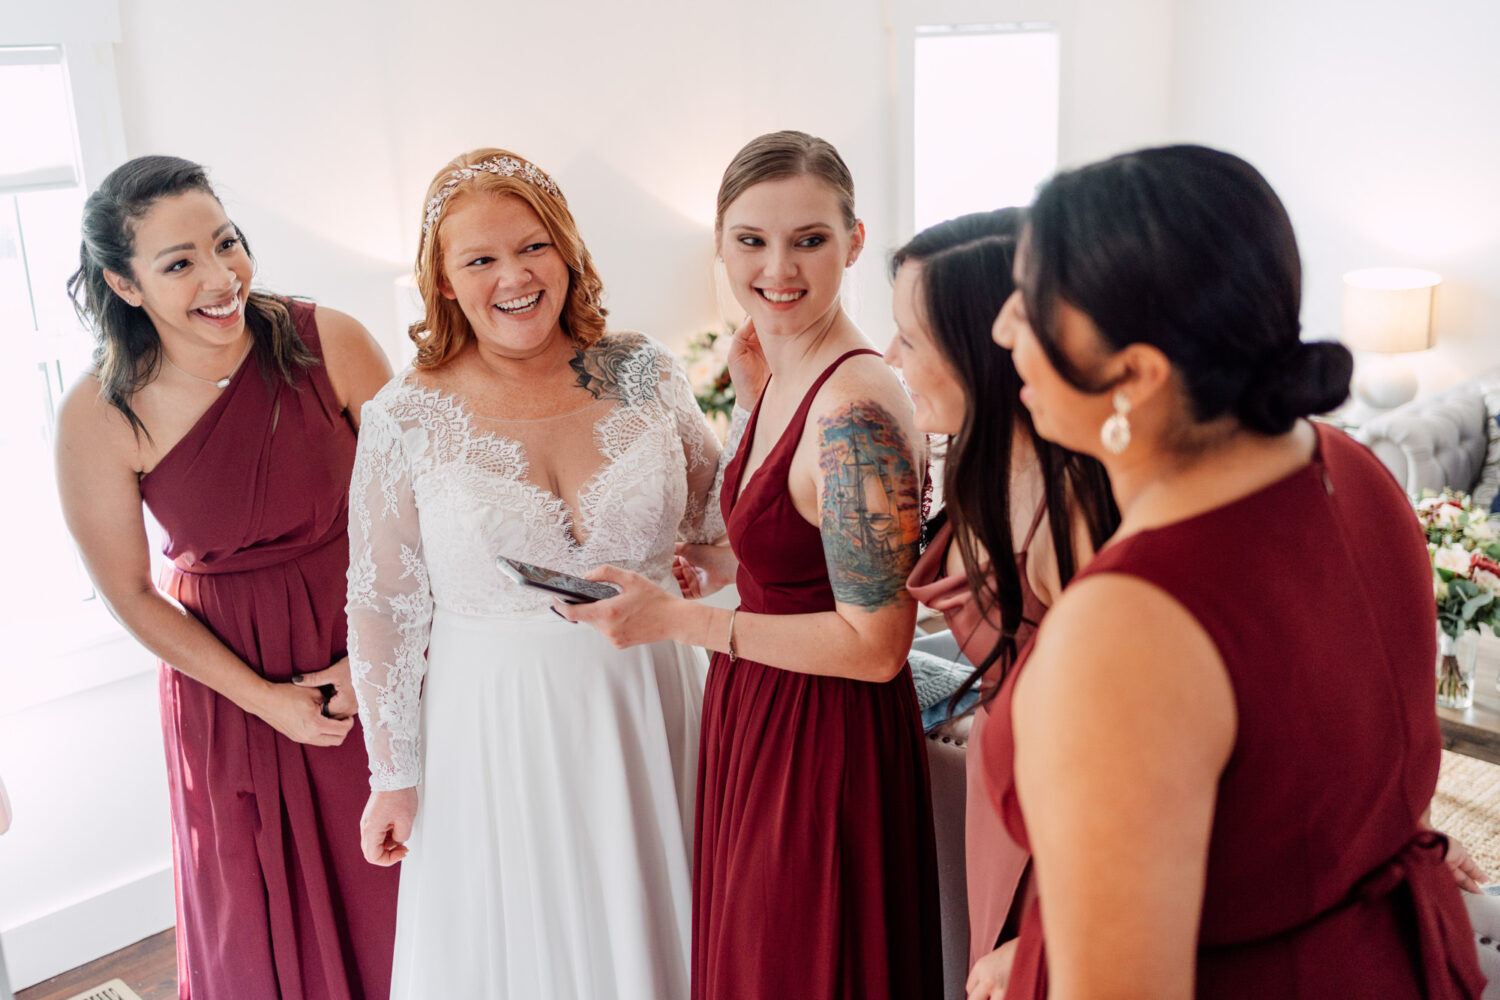 bride and her bridesmaids having fun together before the wedding day